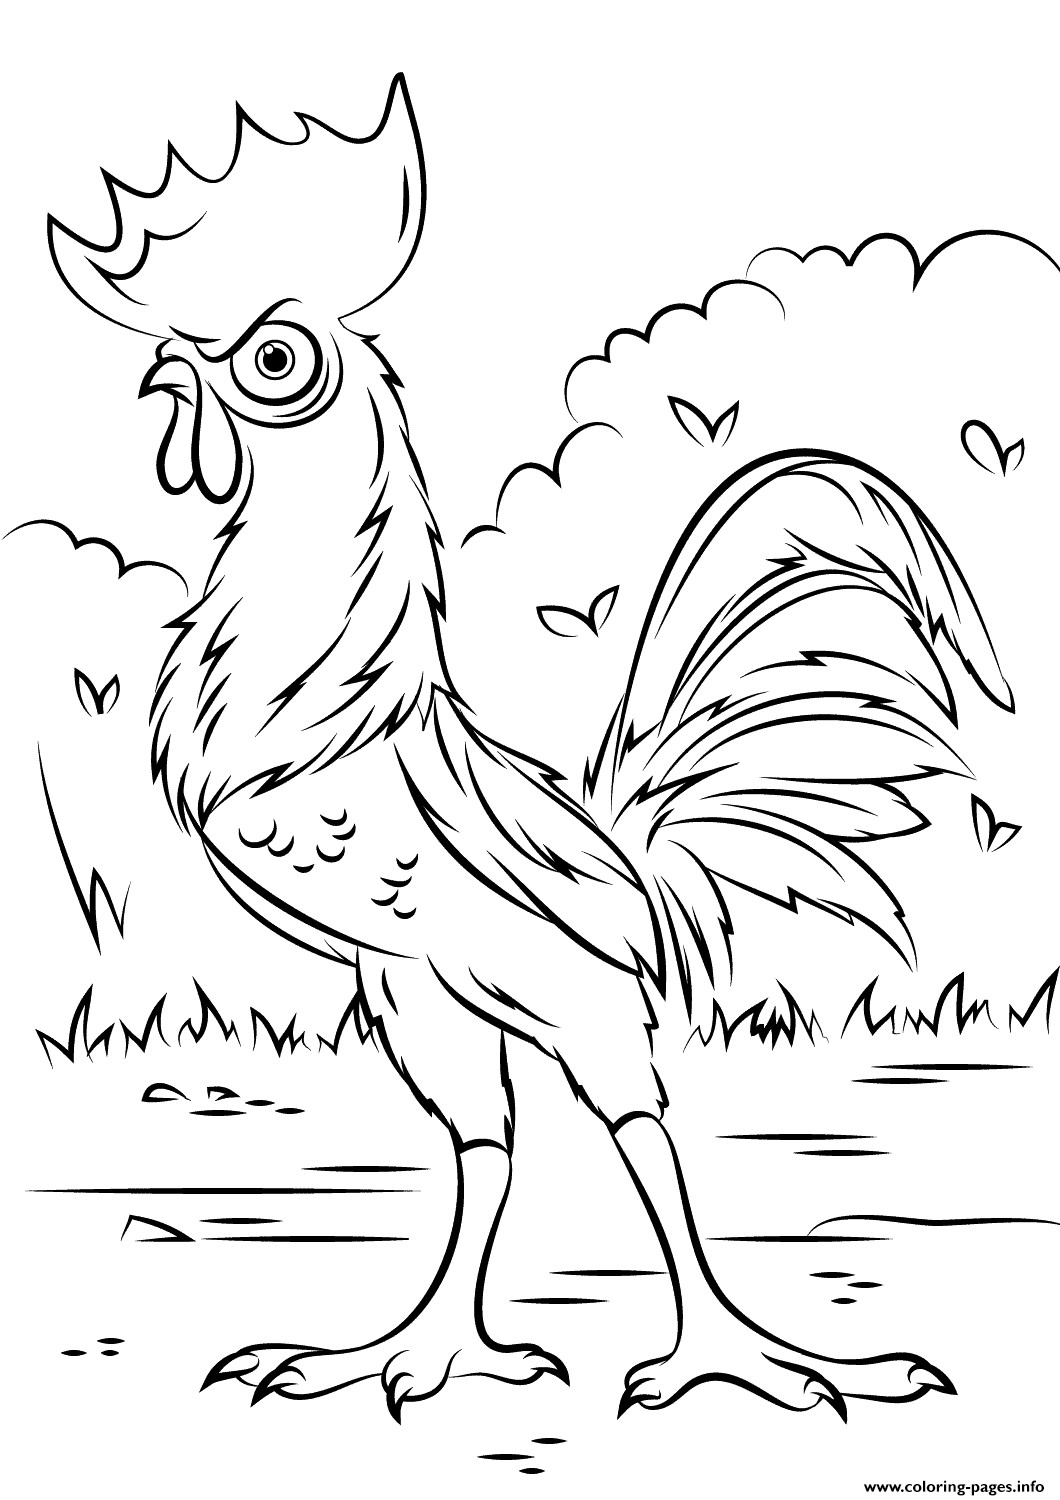 Moana Coloring Pages Printable
 Heihei Rooster From Moana Disney Coloring Pages Printable